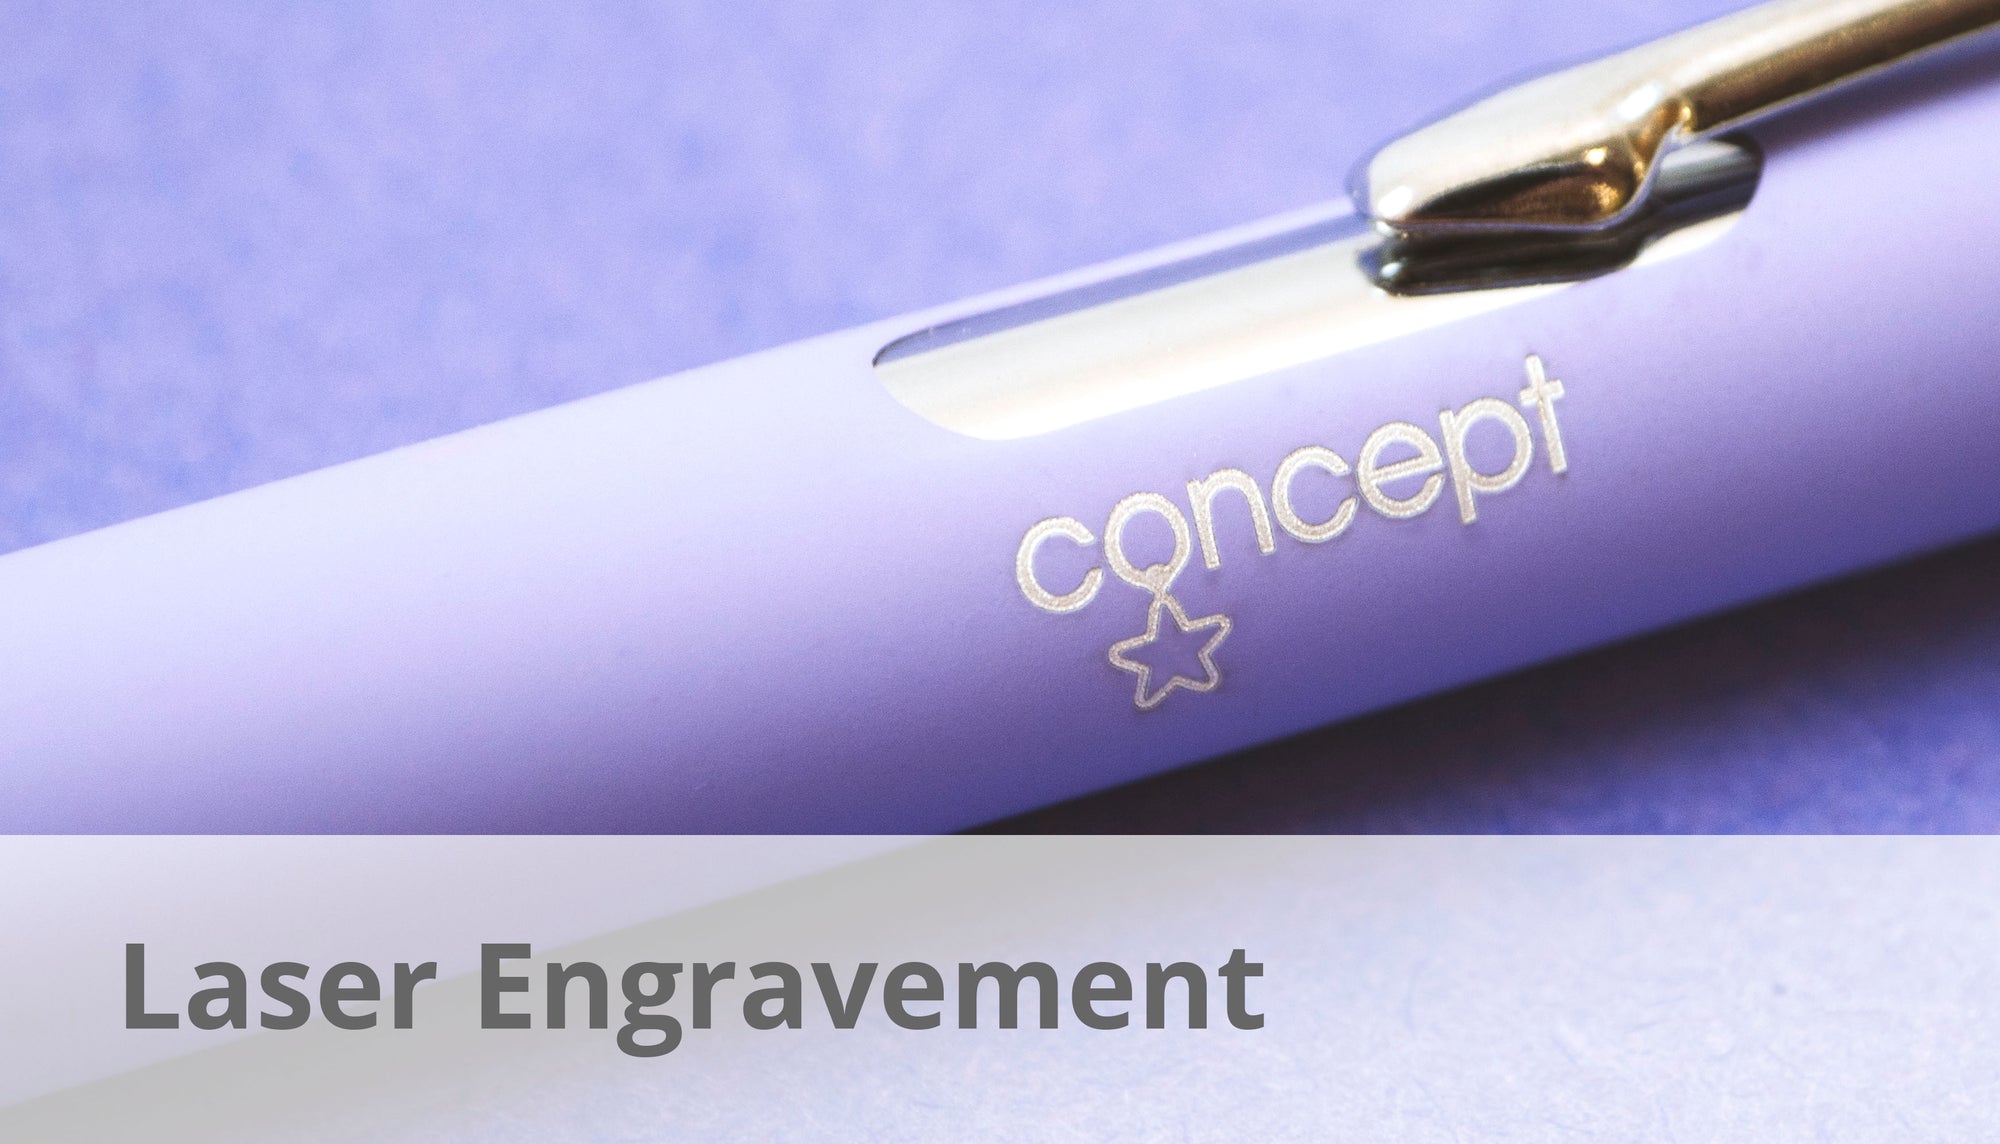 A promotional pen, laser engraved with a company logo